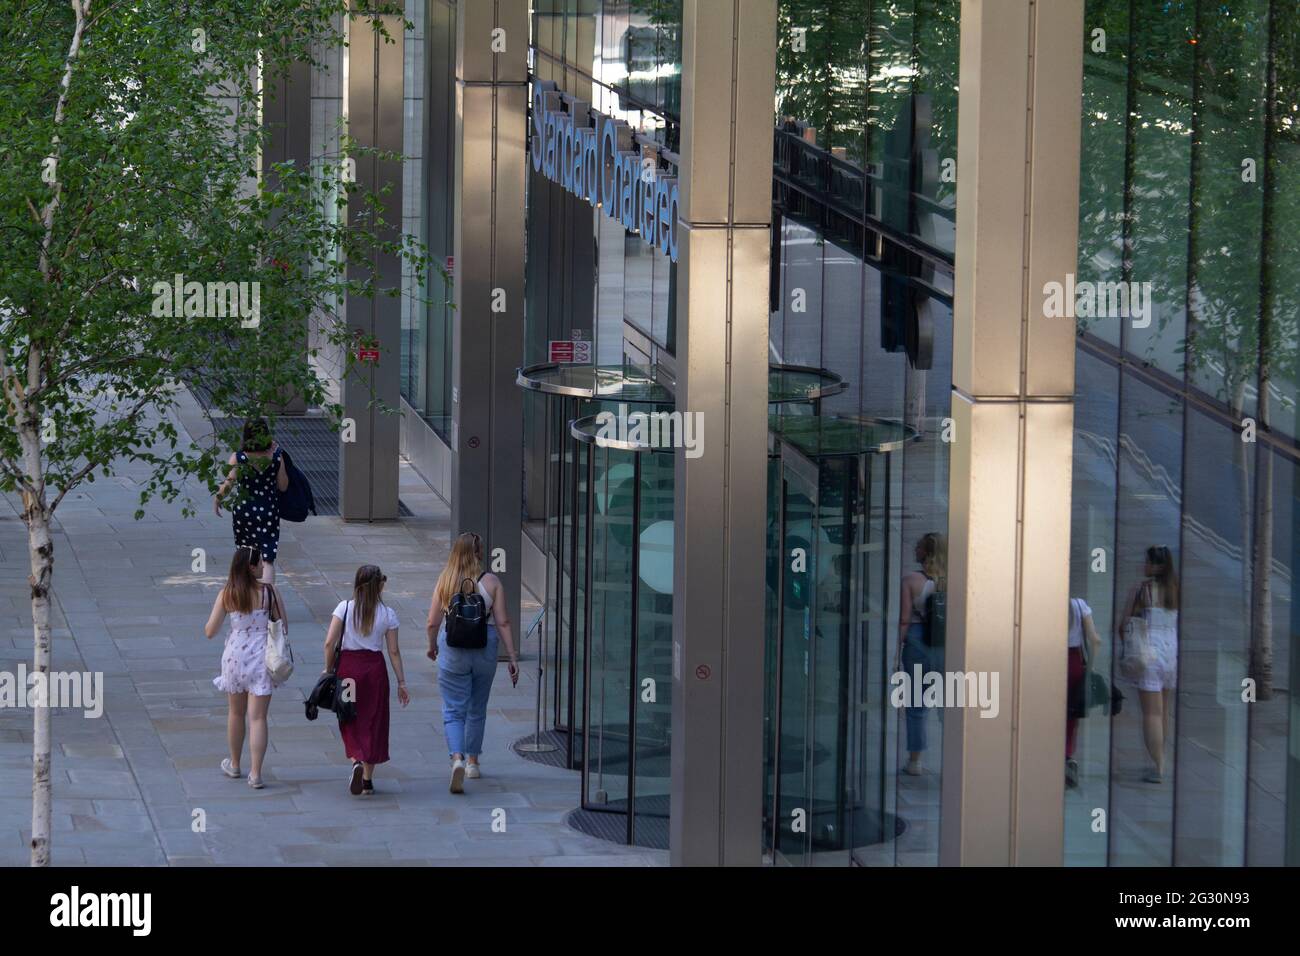 Female city workers walking past Standard Chartered bank in City of London Stock Photo